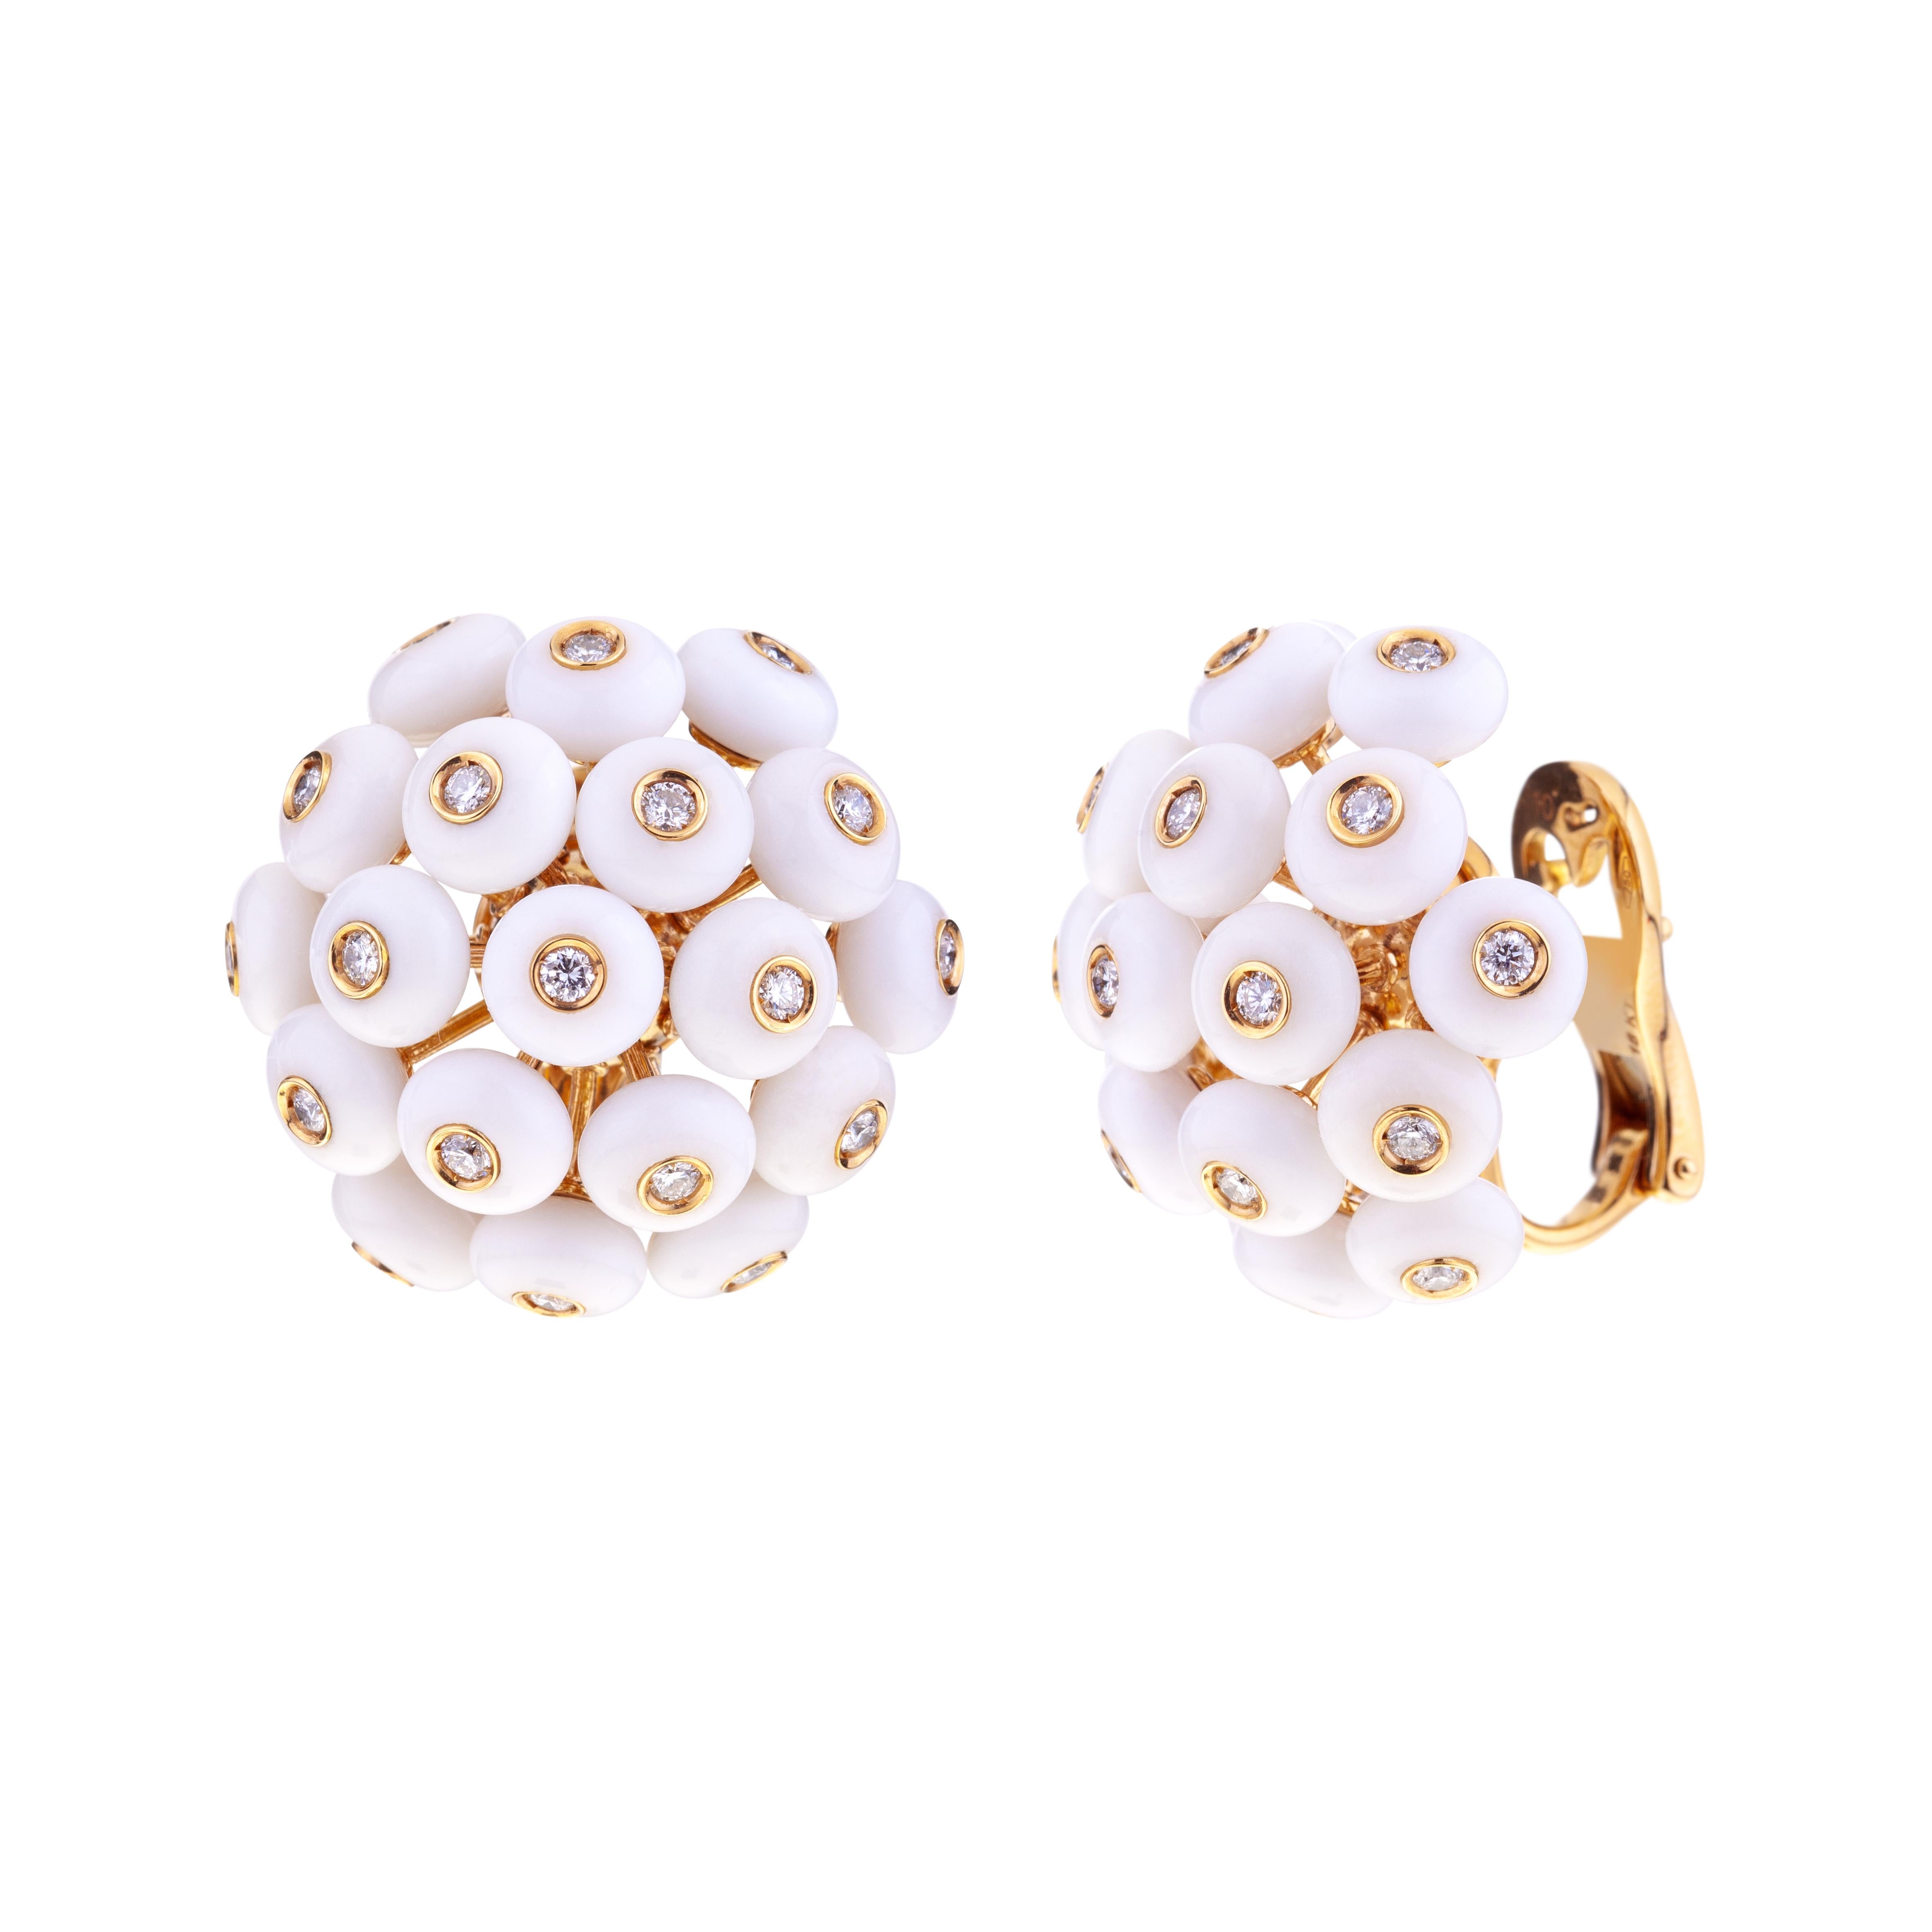 Chantecler Dandelion 18kt gold and Kogolong Earrings with Diamonds. 
The name of this collection draws its inspiration from its botanical origin, a special flower that grows in fields and countryside paths. From the study of nature diamonds, rock